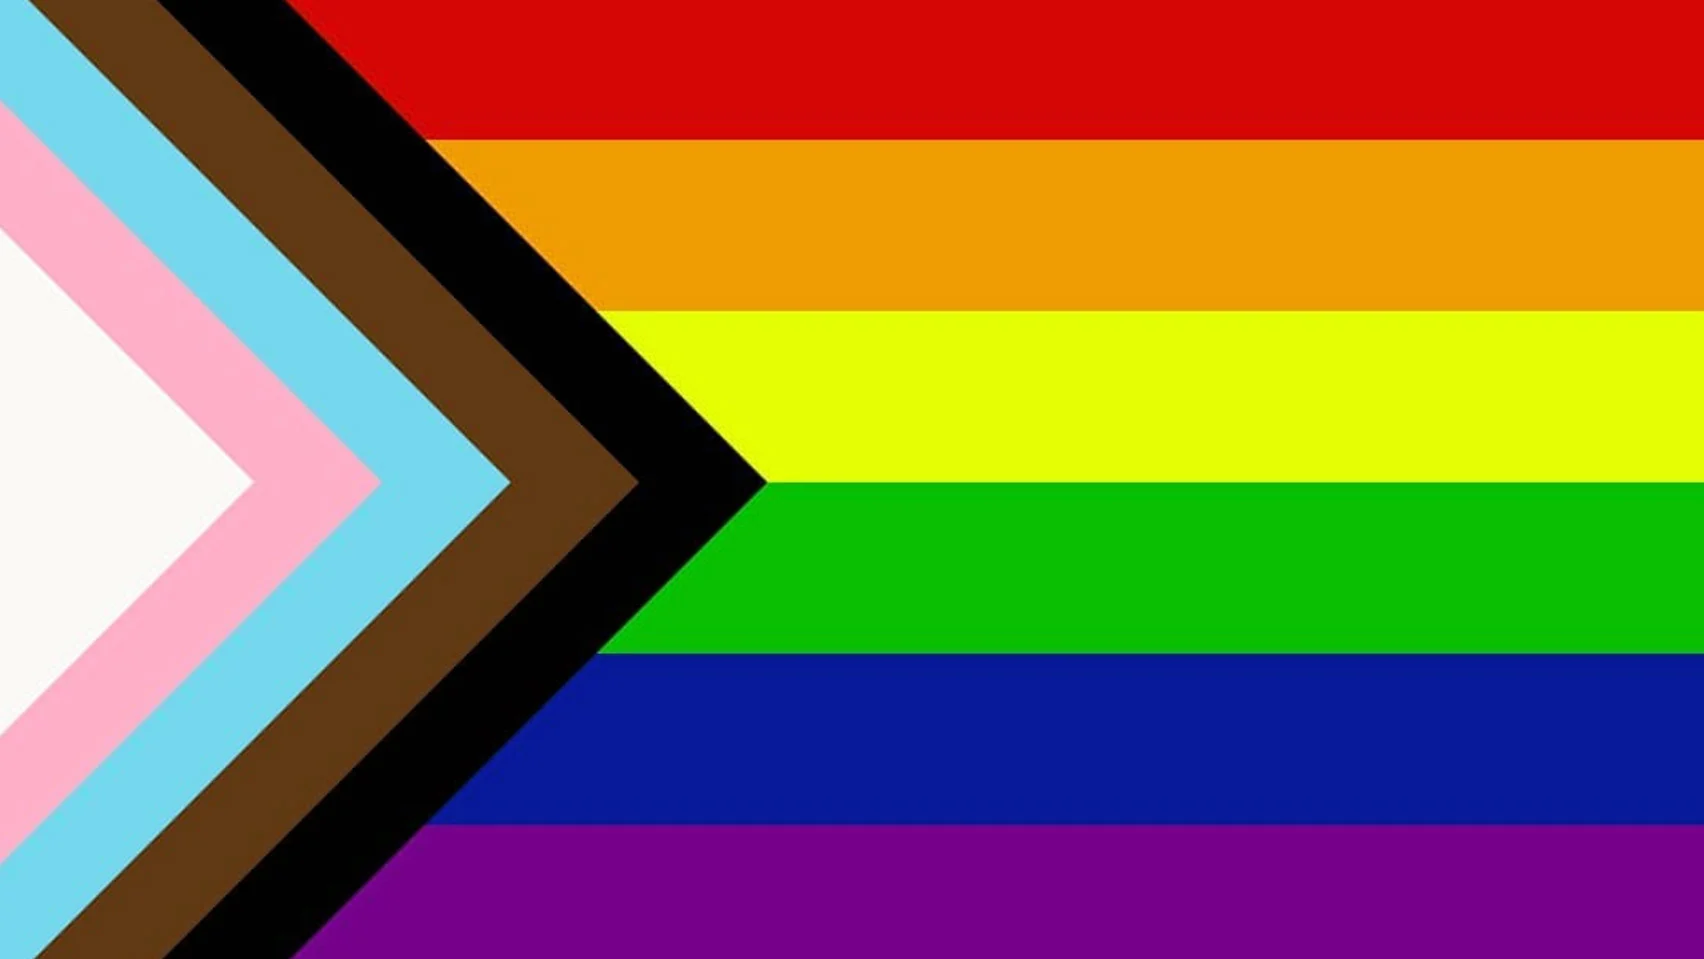 The Progress Pride Flag: All the Colours of the Rainbow